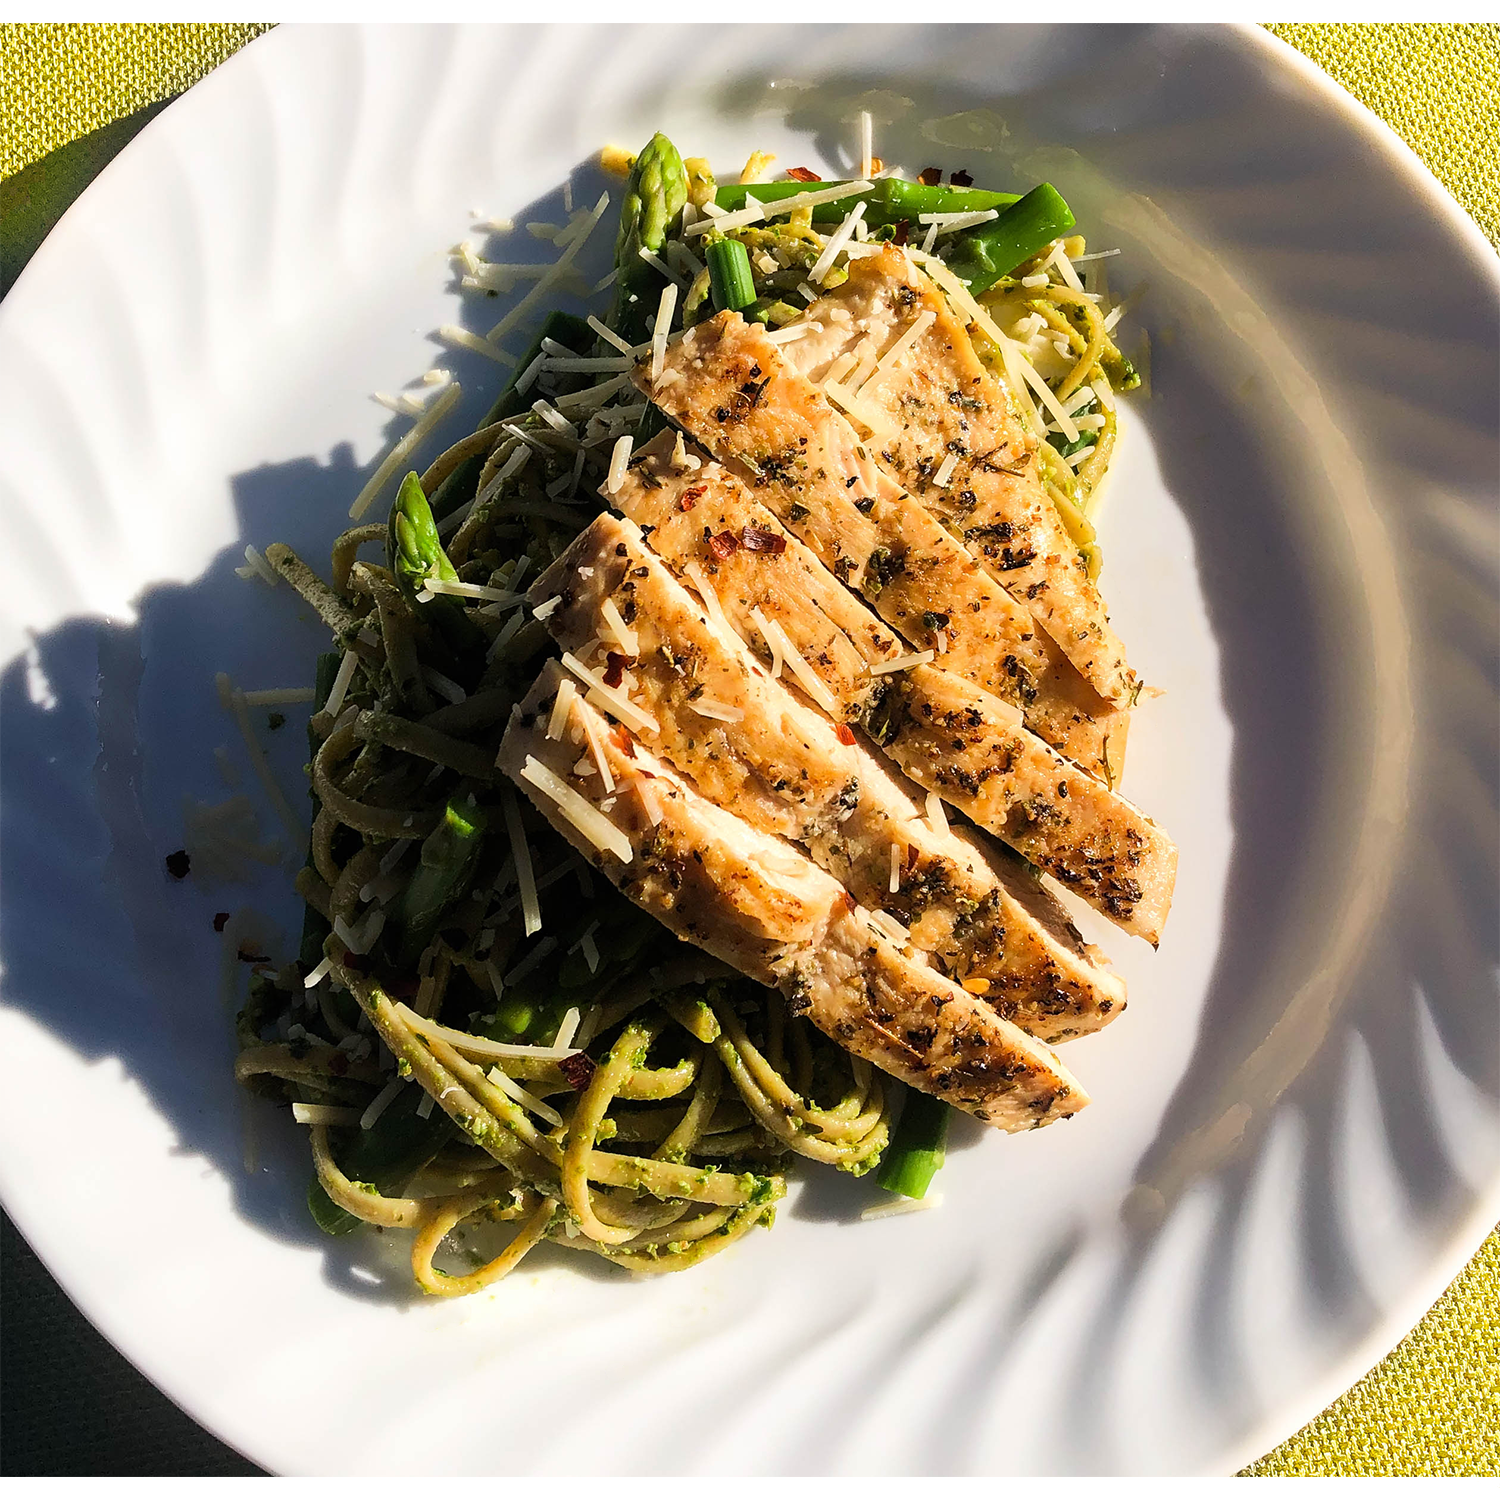 Sauteed Chicken over Pesto Pasta and Asparagus